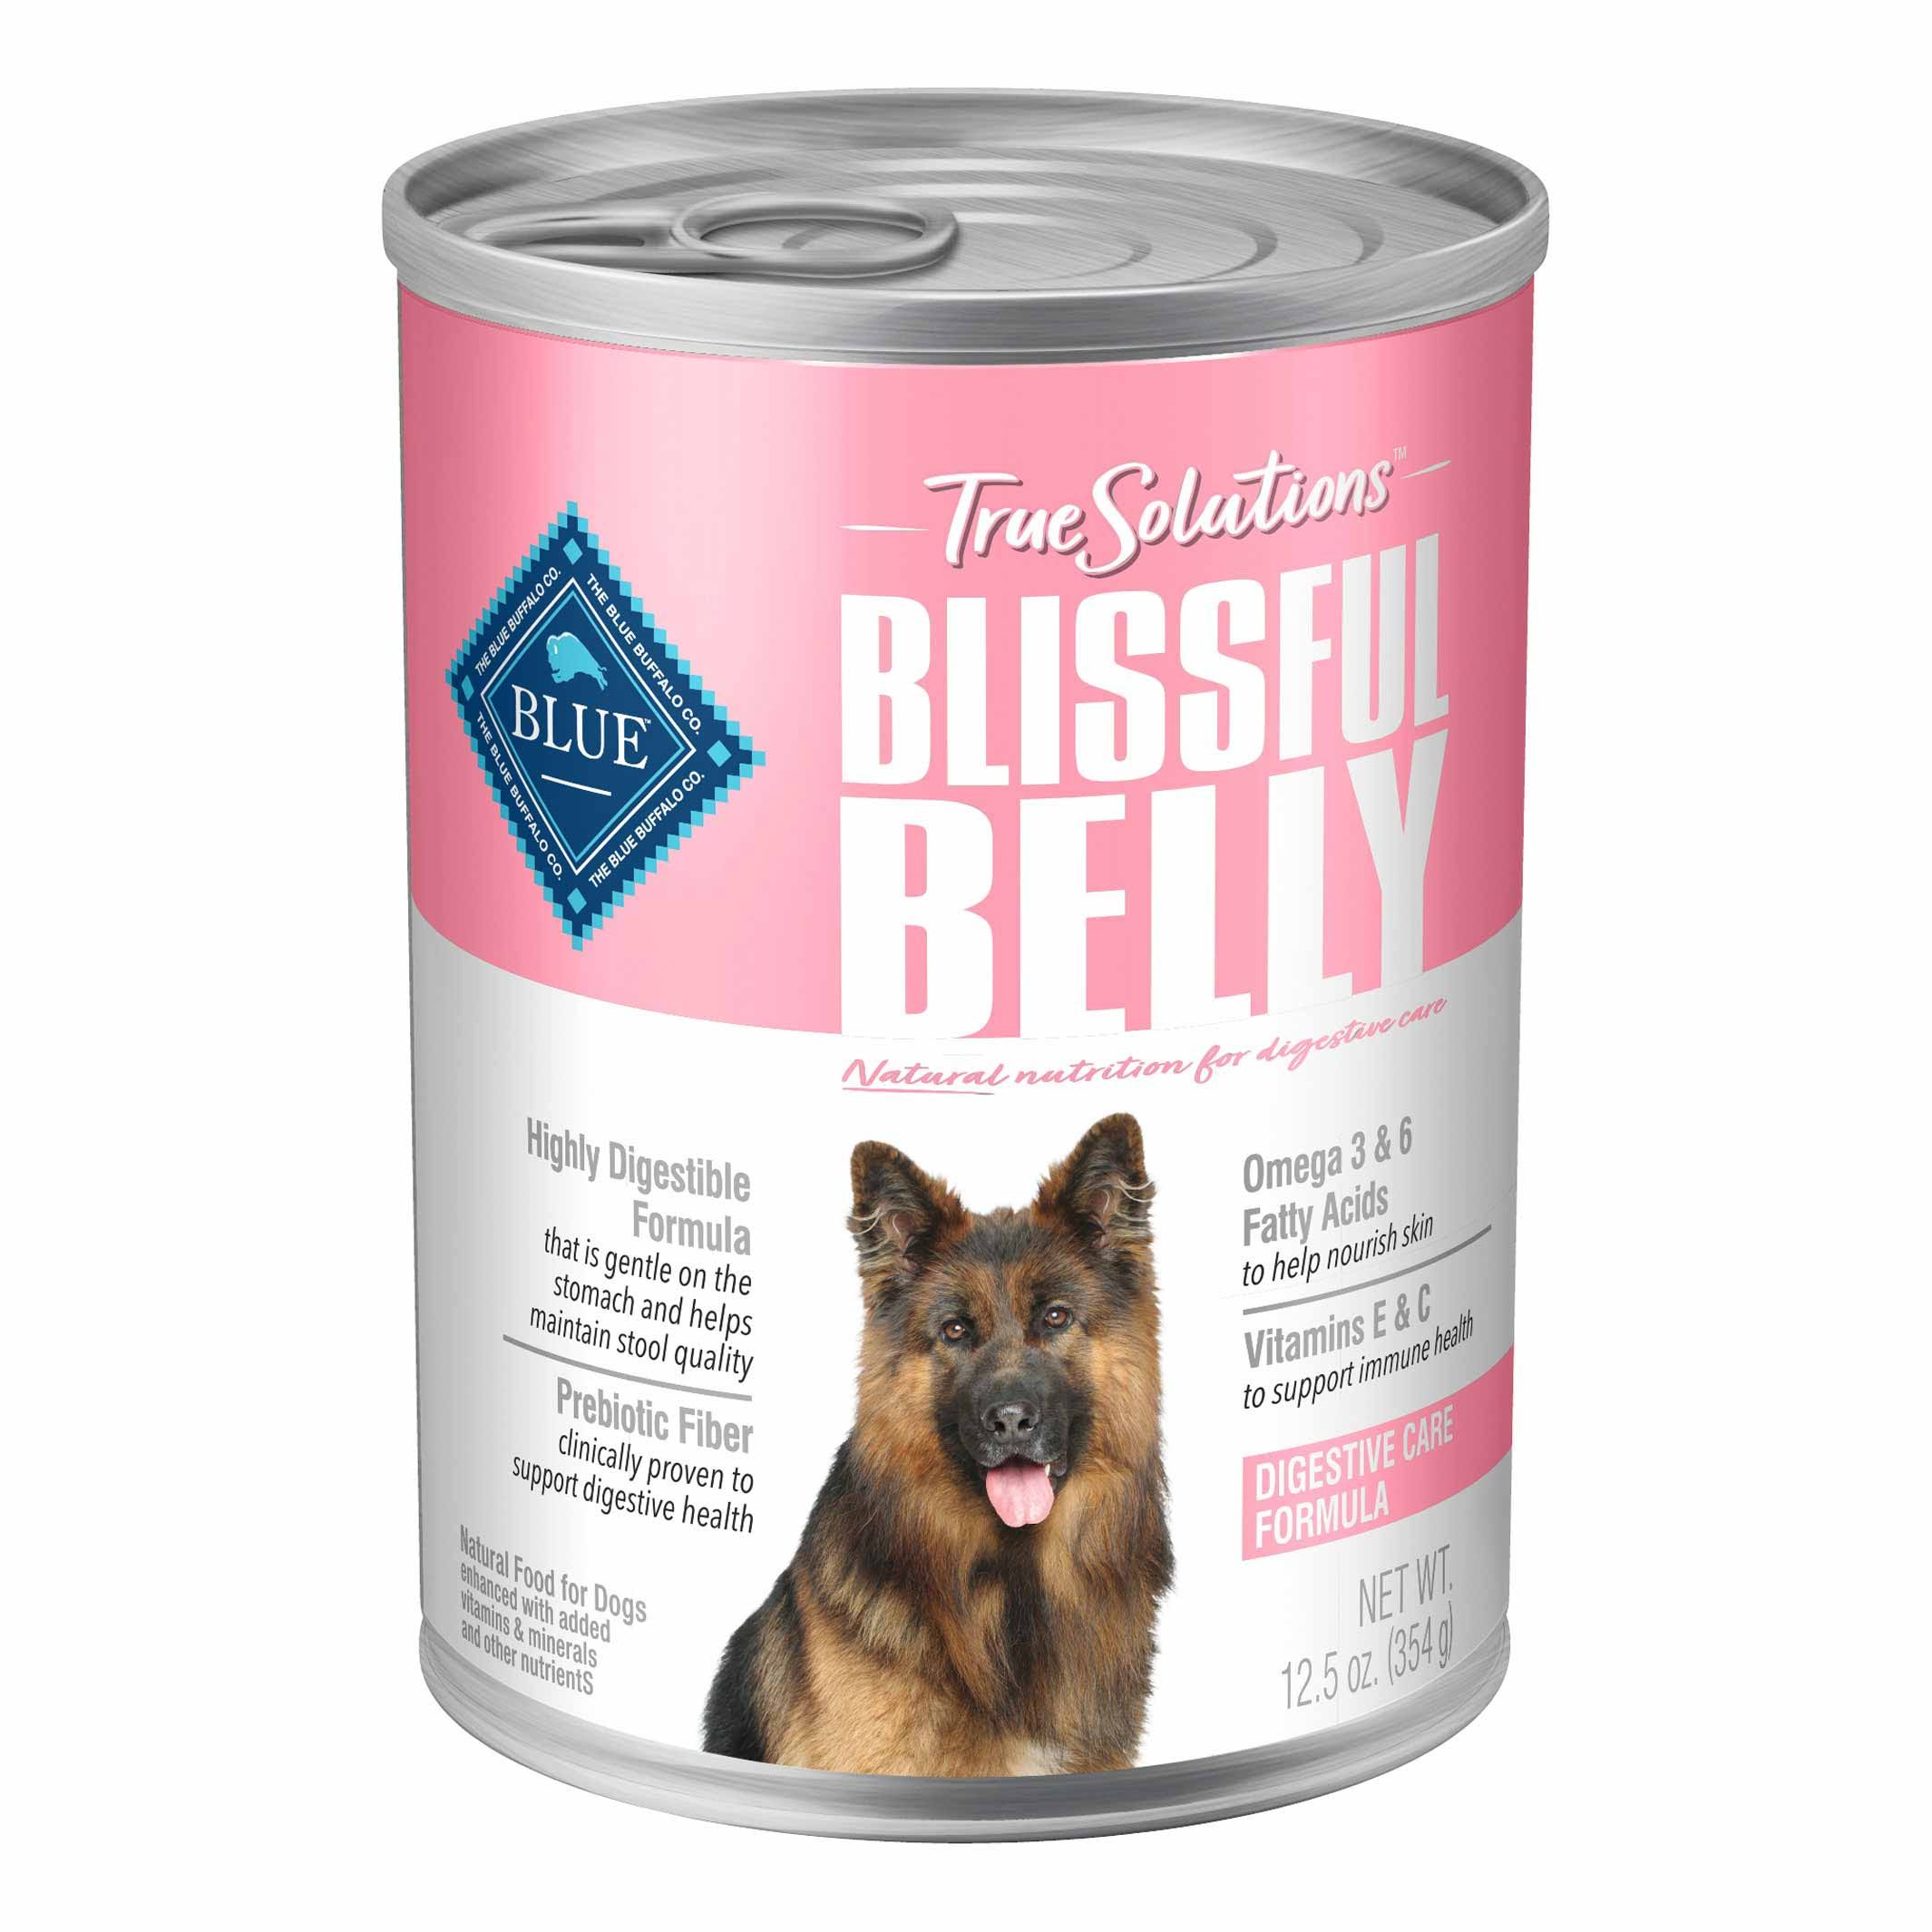 Blue Buffalo Blue True Solutions Food for Dogs, Blissful Belly - 12.5 oz